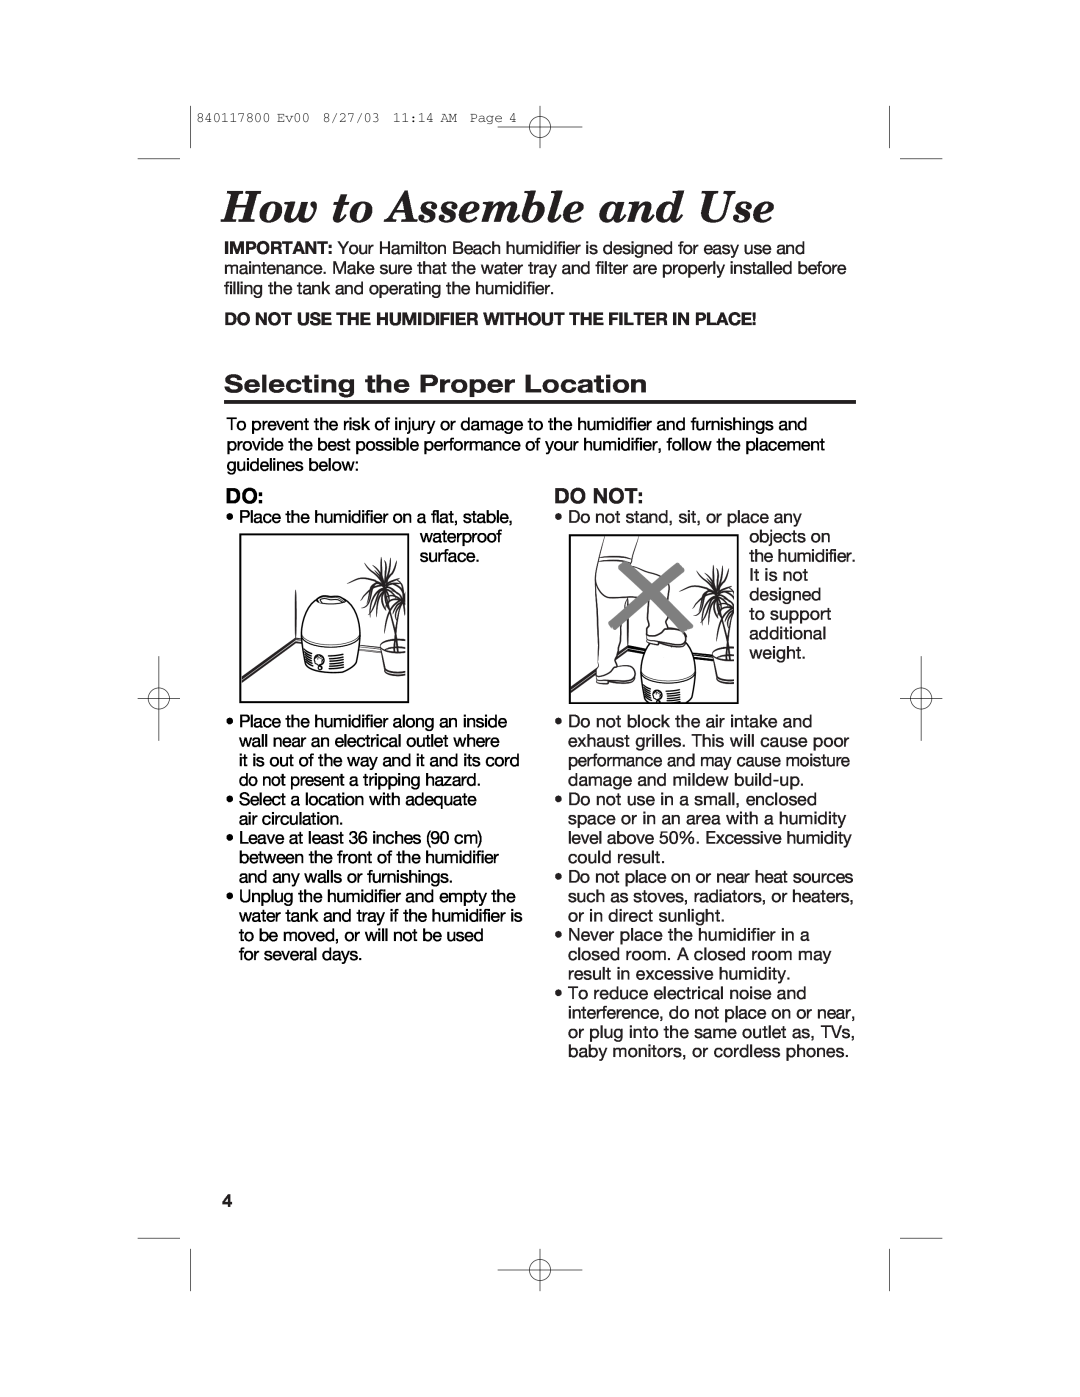 Hamilton Beach 840117800 manual How to Assemble and Use, Selecting the Proper Location, Do Not 